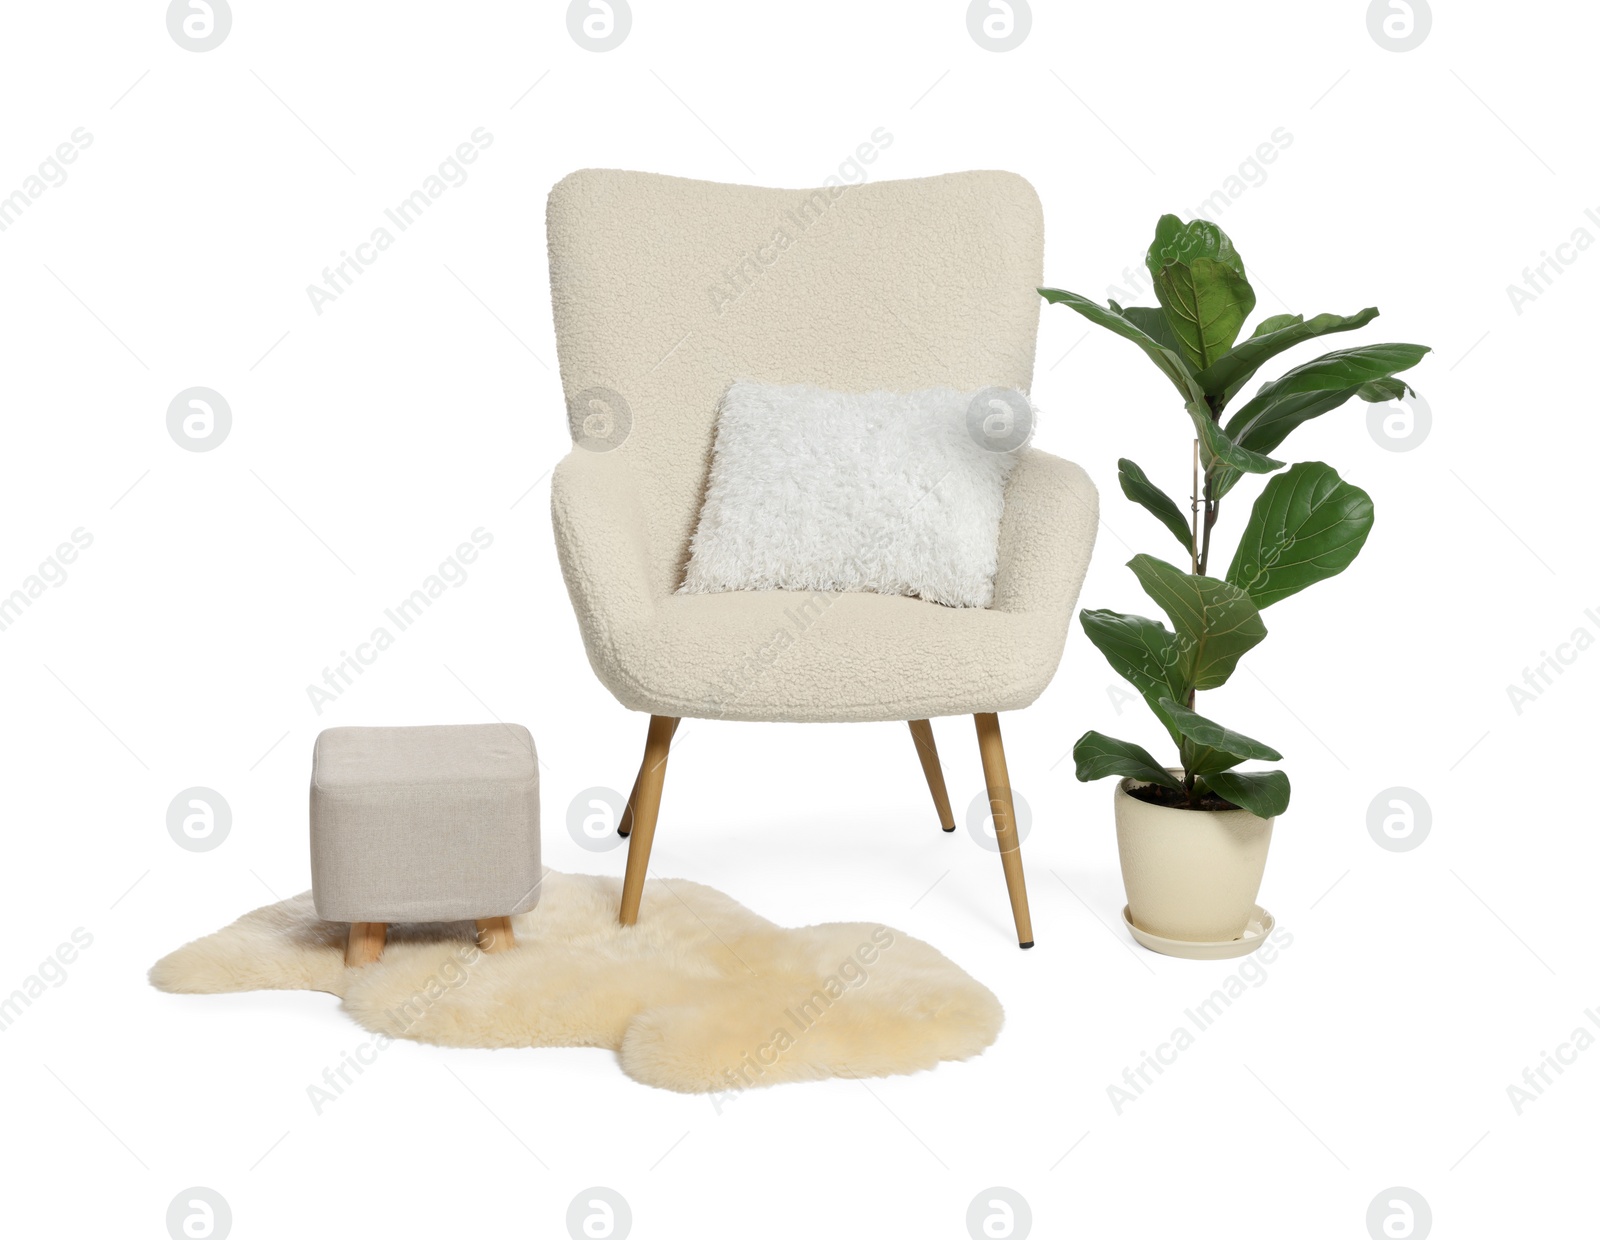 Photo of Stylish comfortable armchair with pillow, houseplant, ottoman and fluffy rug isolated on white